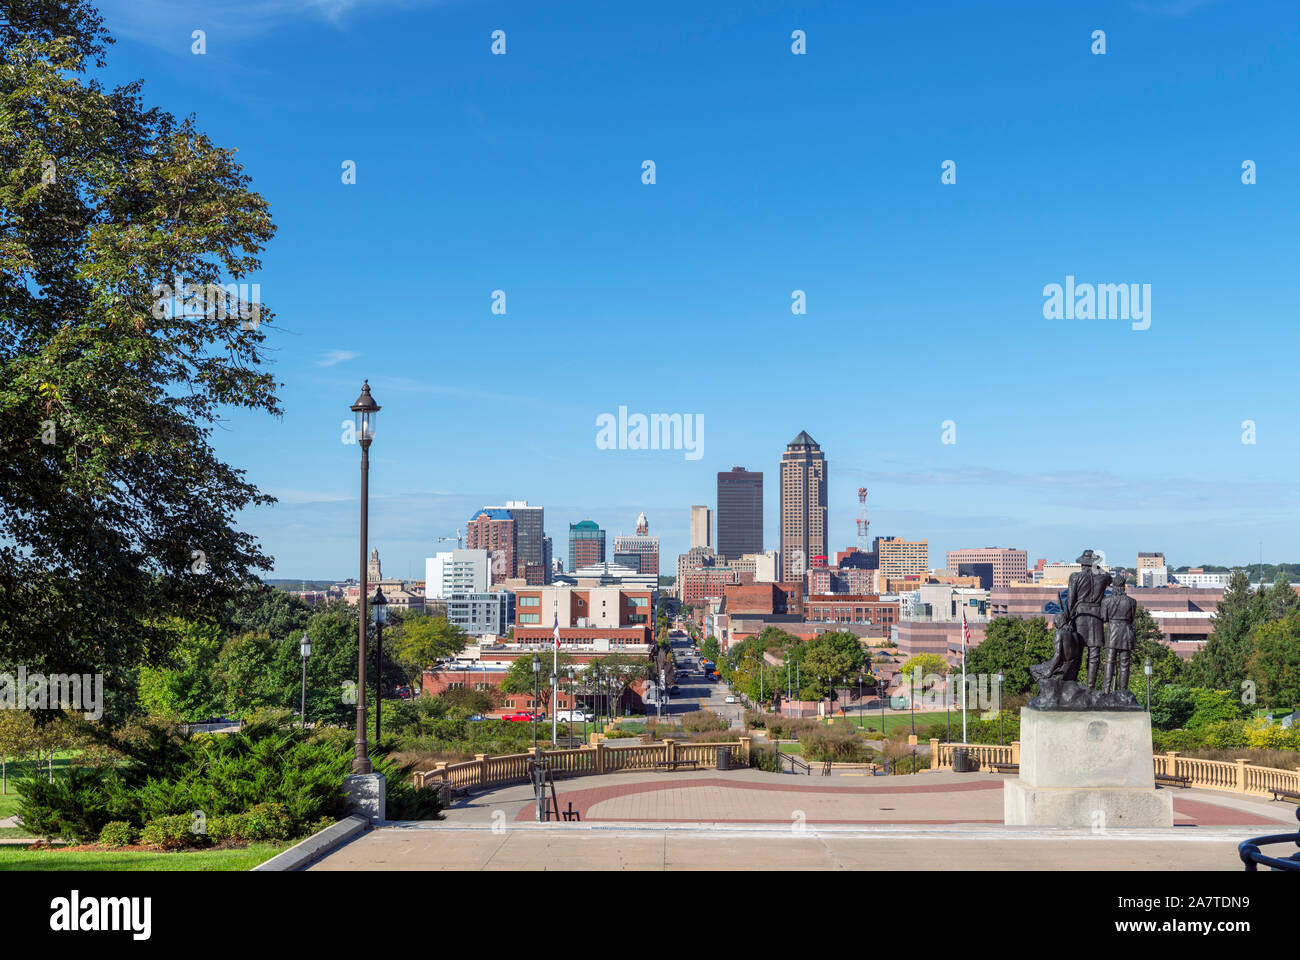 View of the downtown skyline from the steps of the Iowa State Capitol (Iowa Statehouse), Des Moines, Iowa, USA. Stock Photo